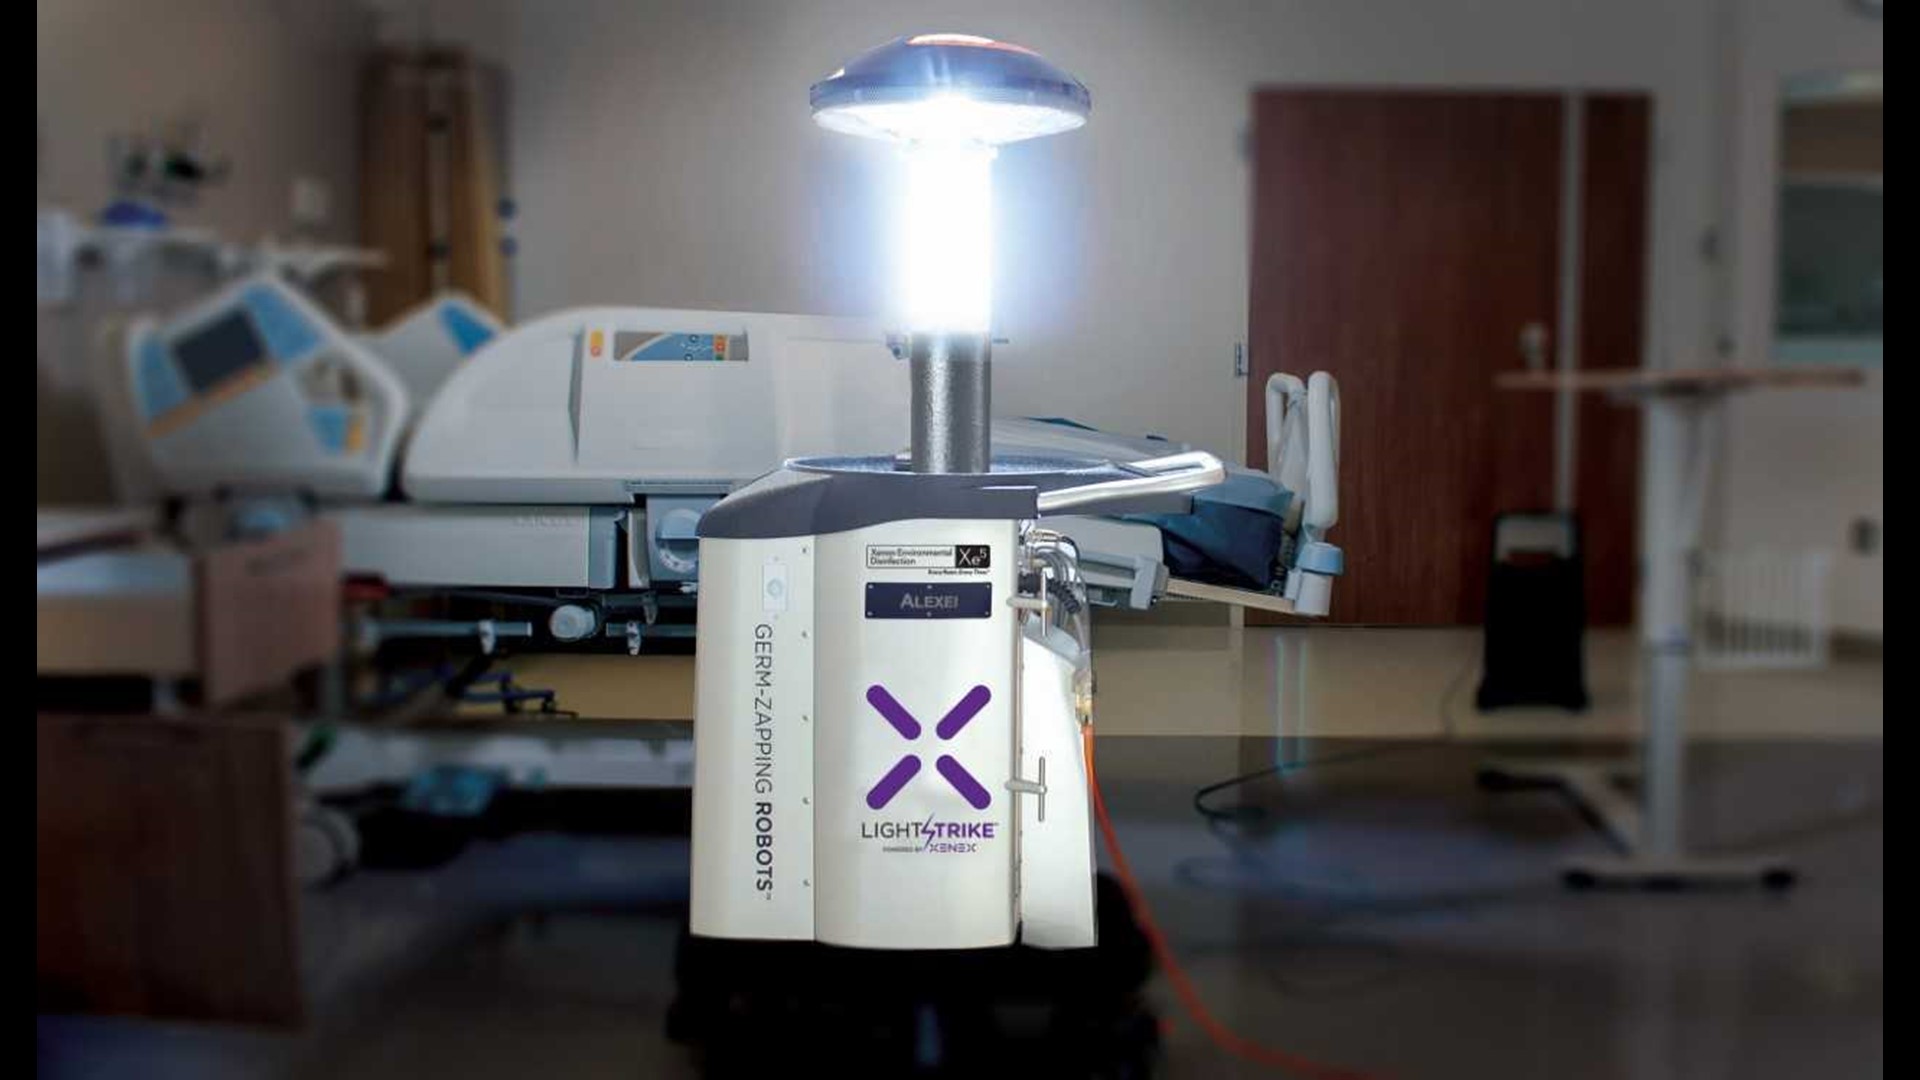 KREM's Kierra Elfalan heads to Northwest Specialty Hospital in Post Falls to learn how their Xenex Germ-Zapping Robot helps keep infections to a minimum.